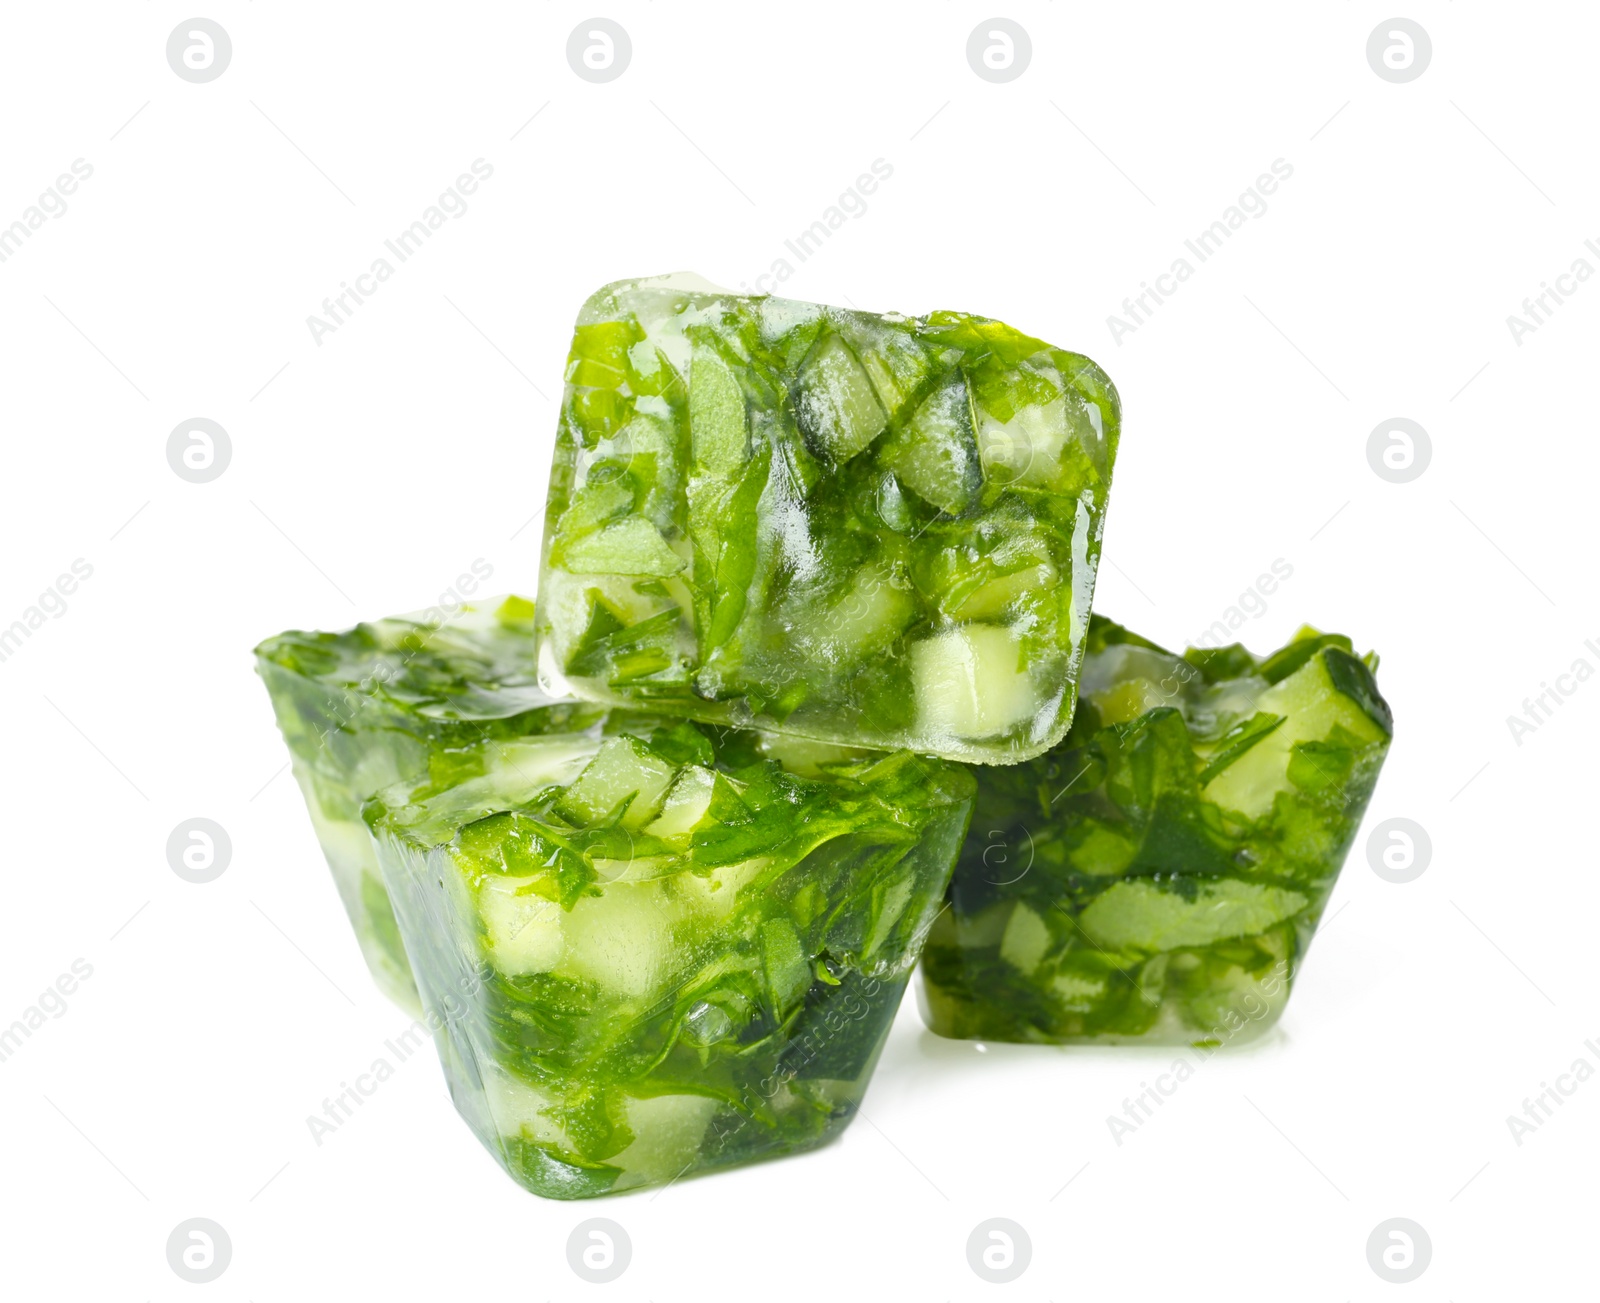 Photo of Ice cubes with cucumber slices and herbs on white background